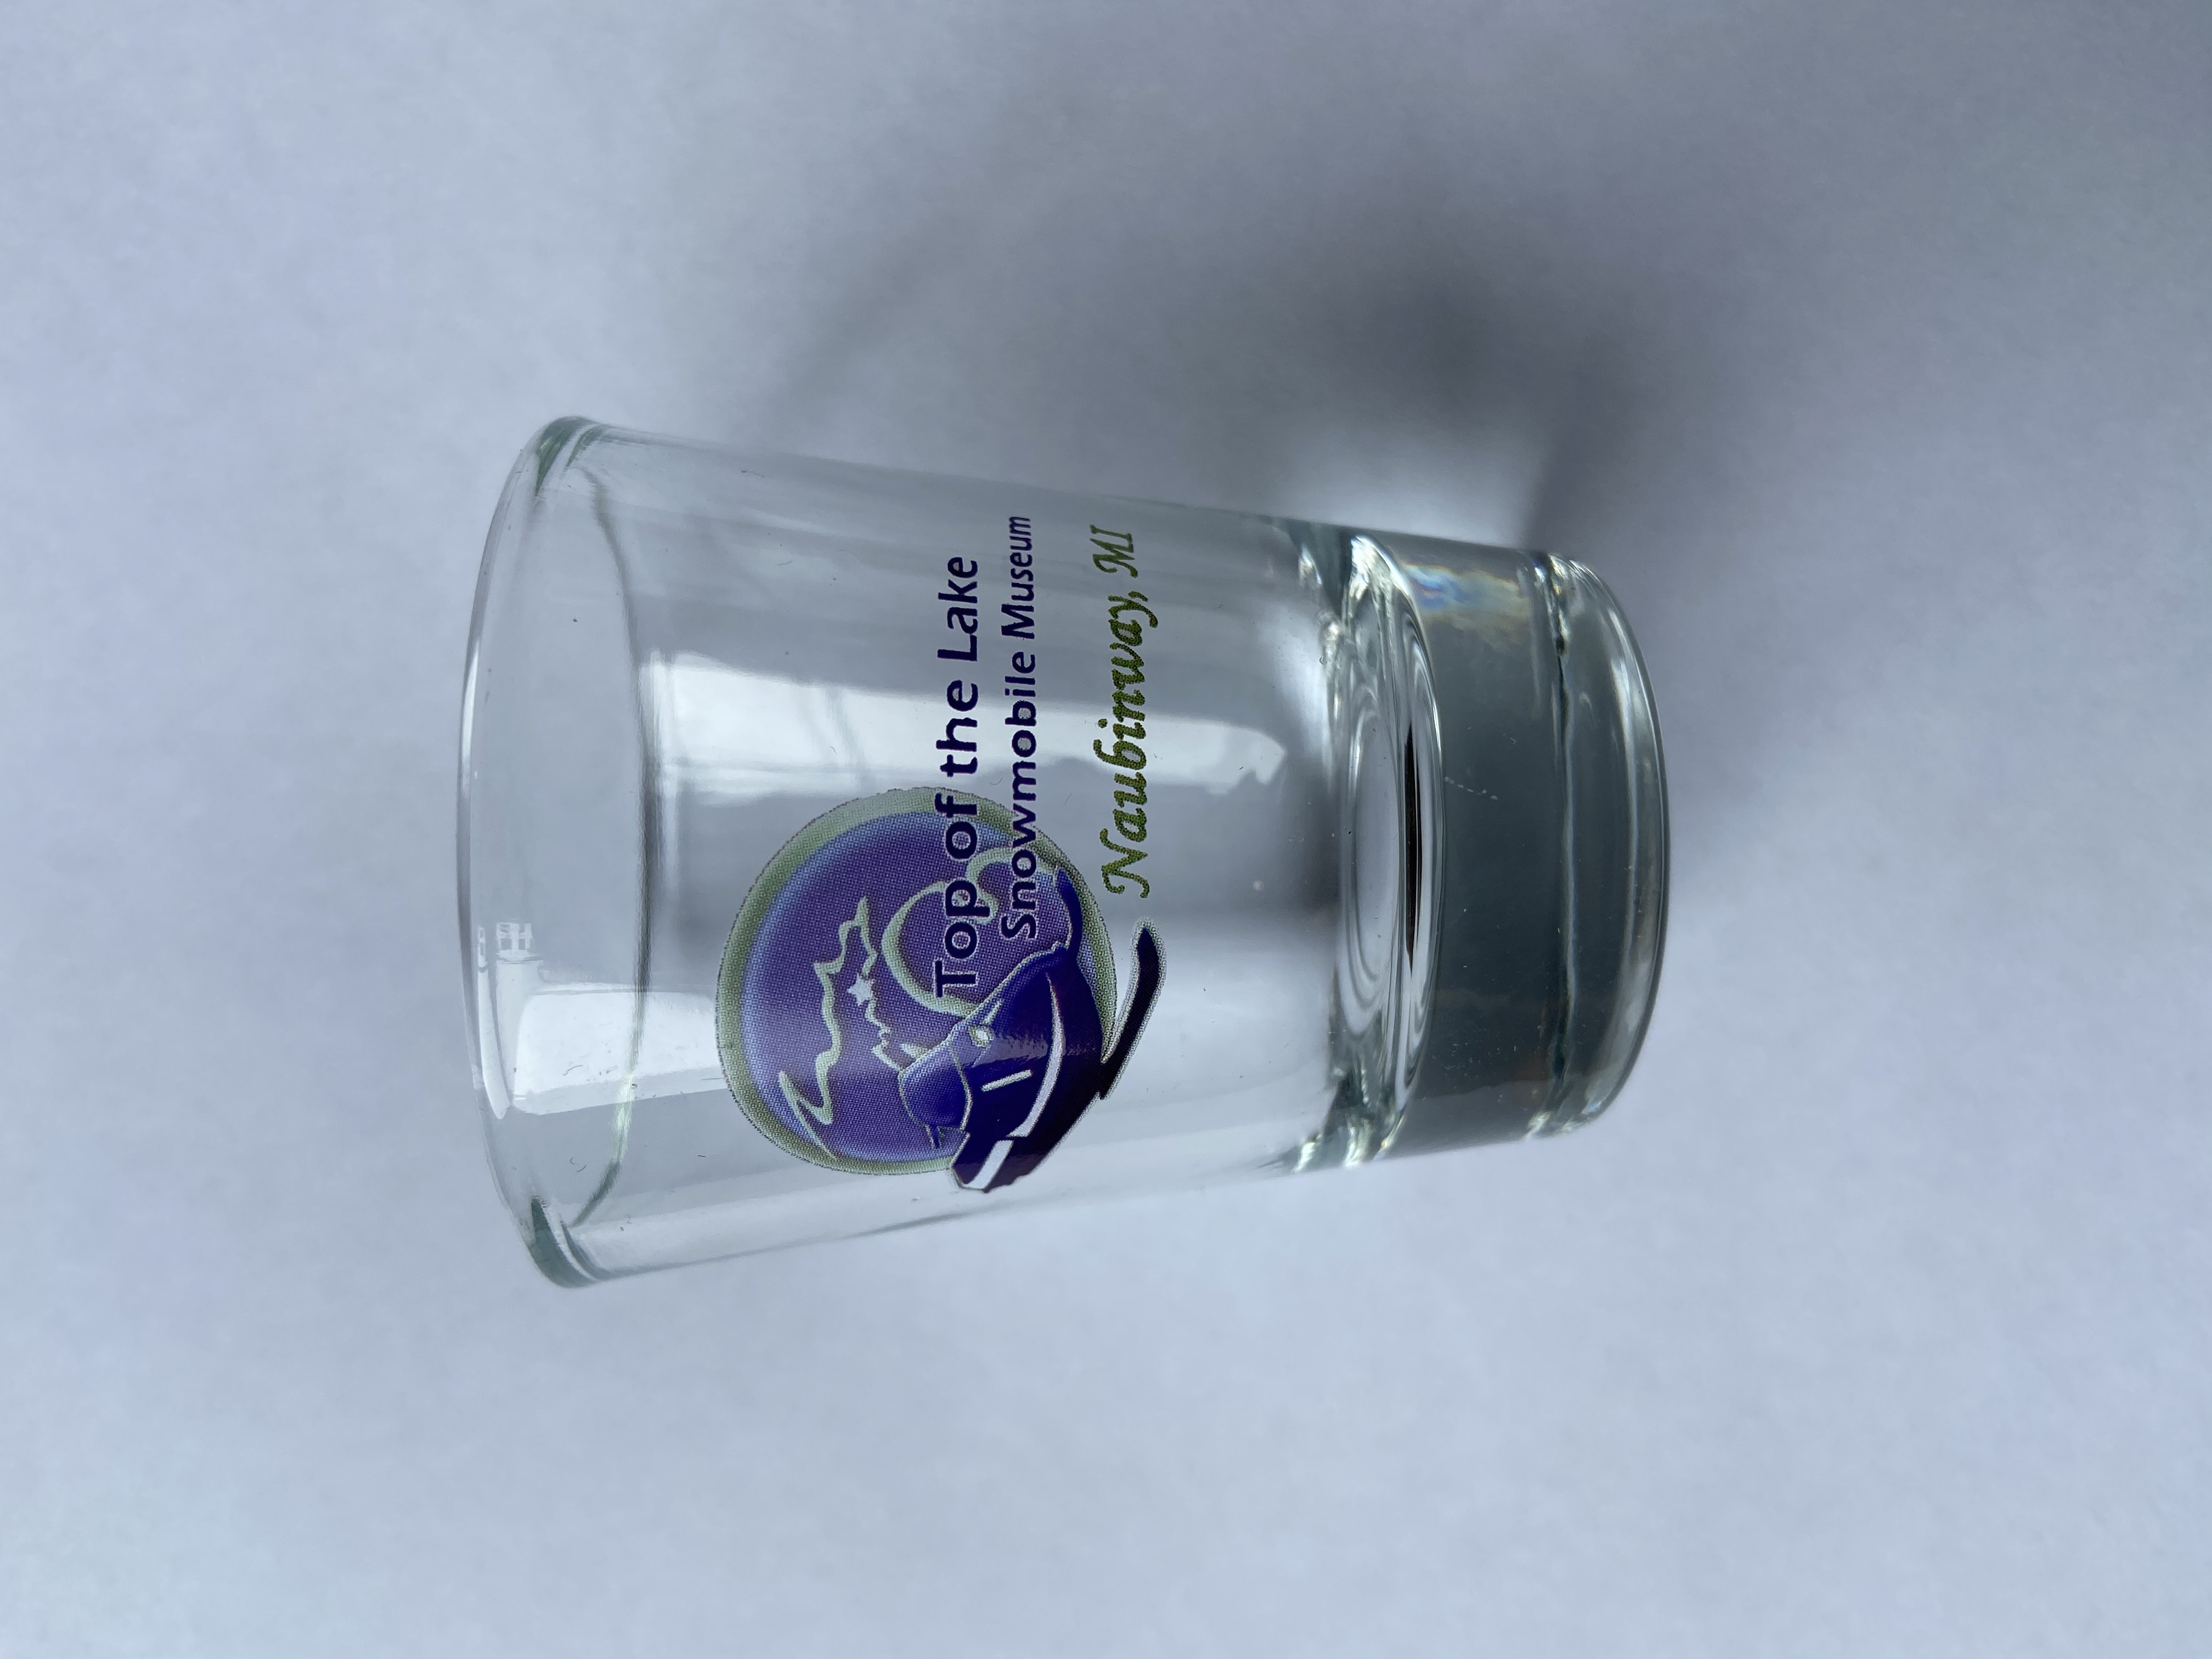 Shot glass with Museum logo